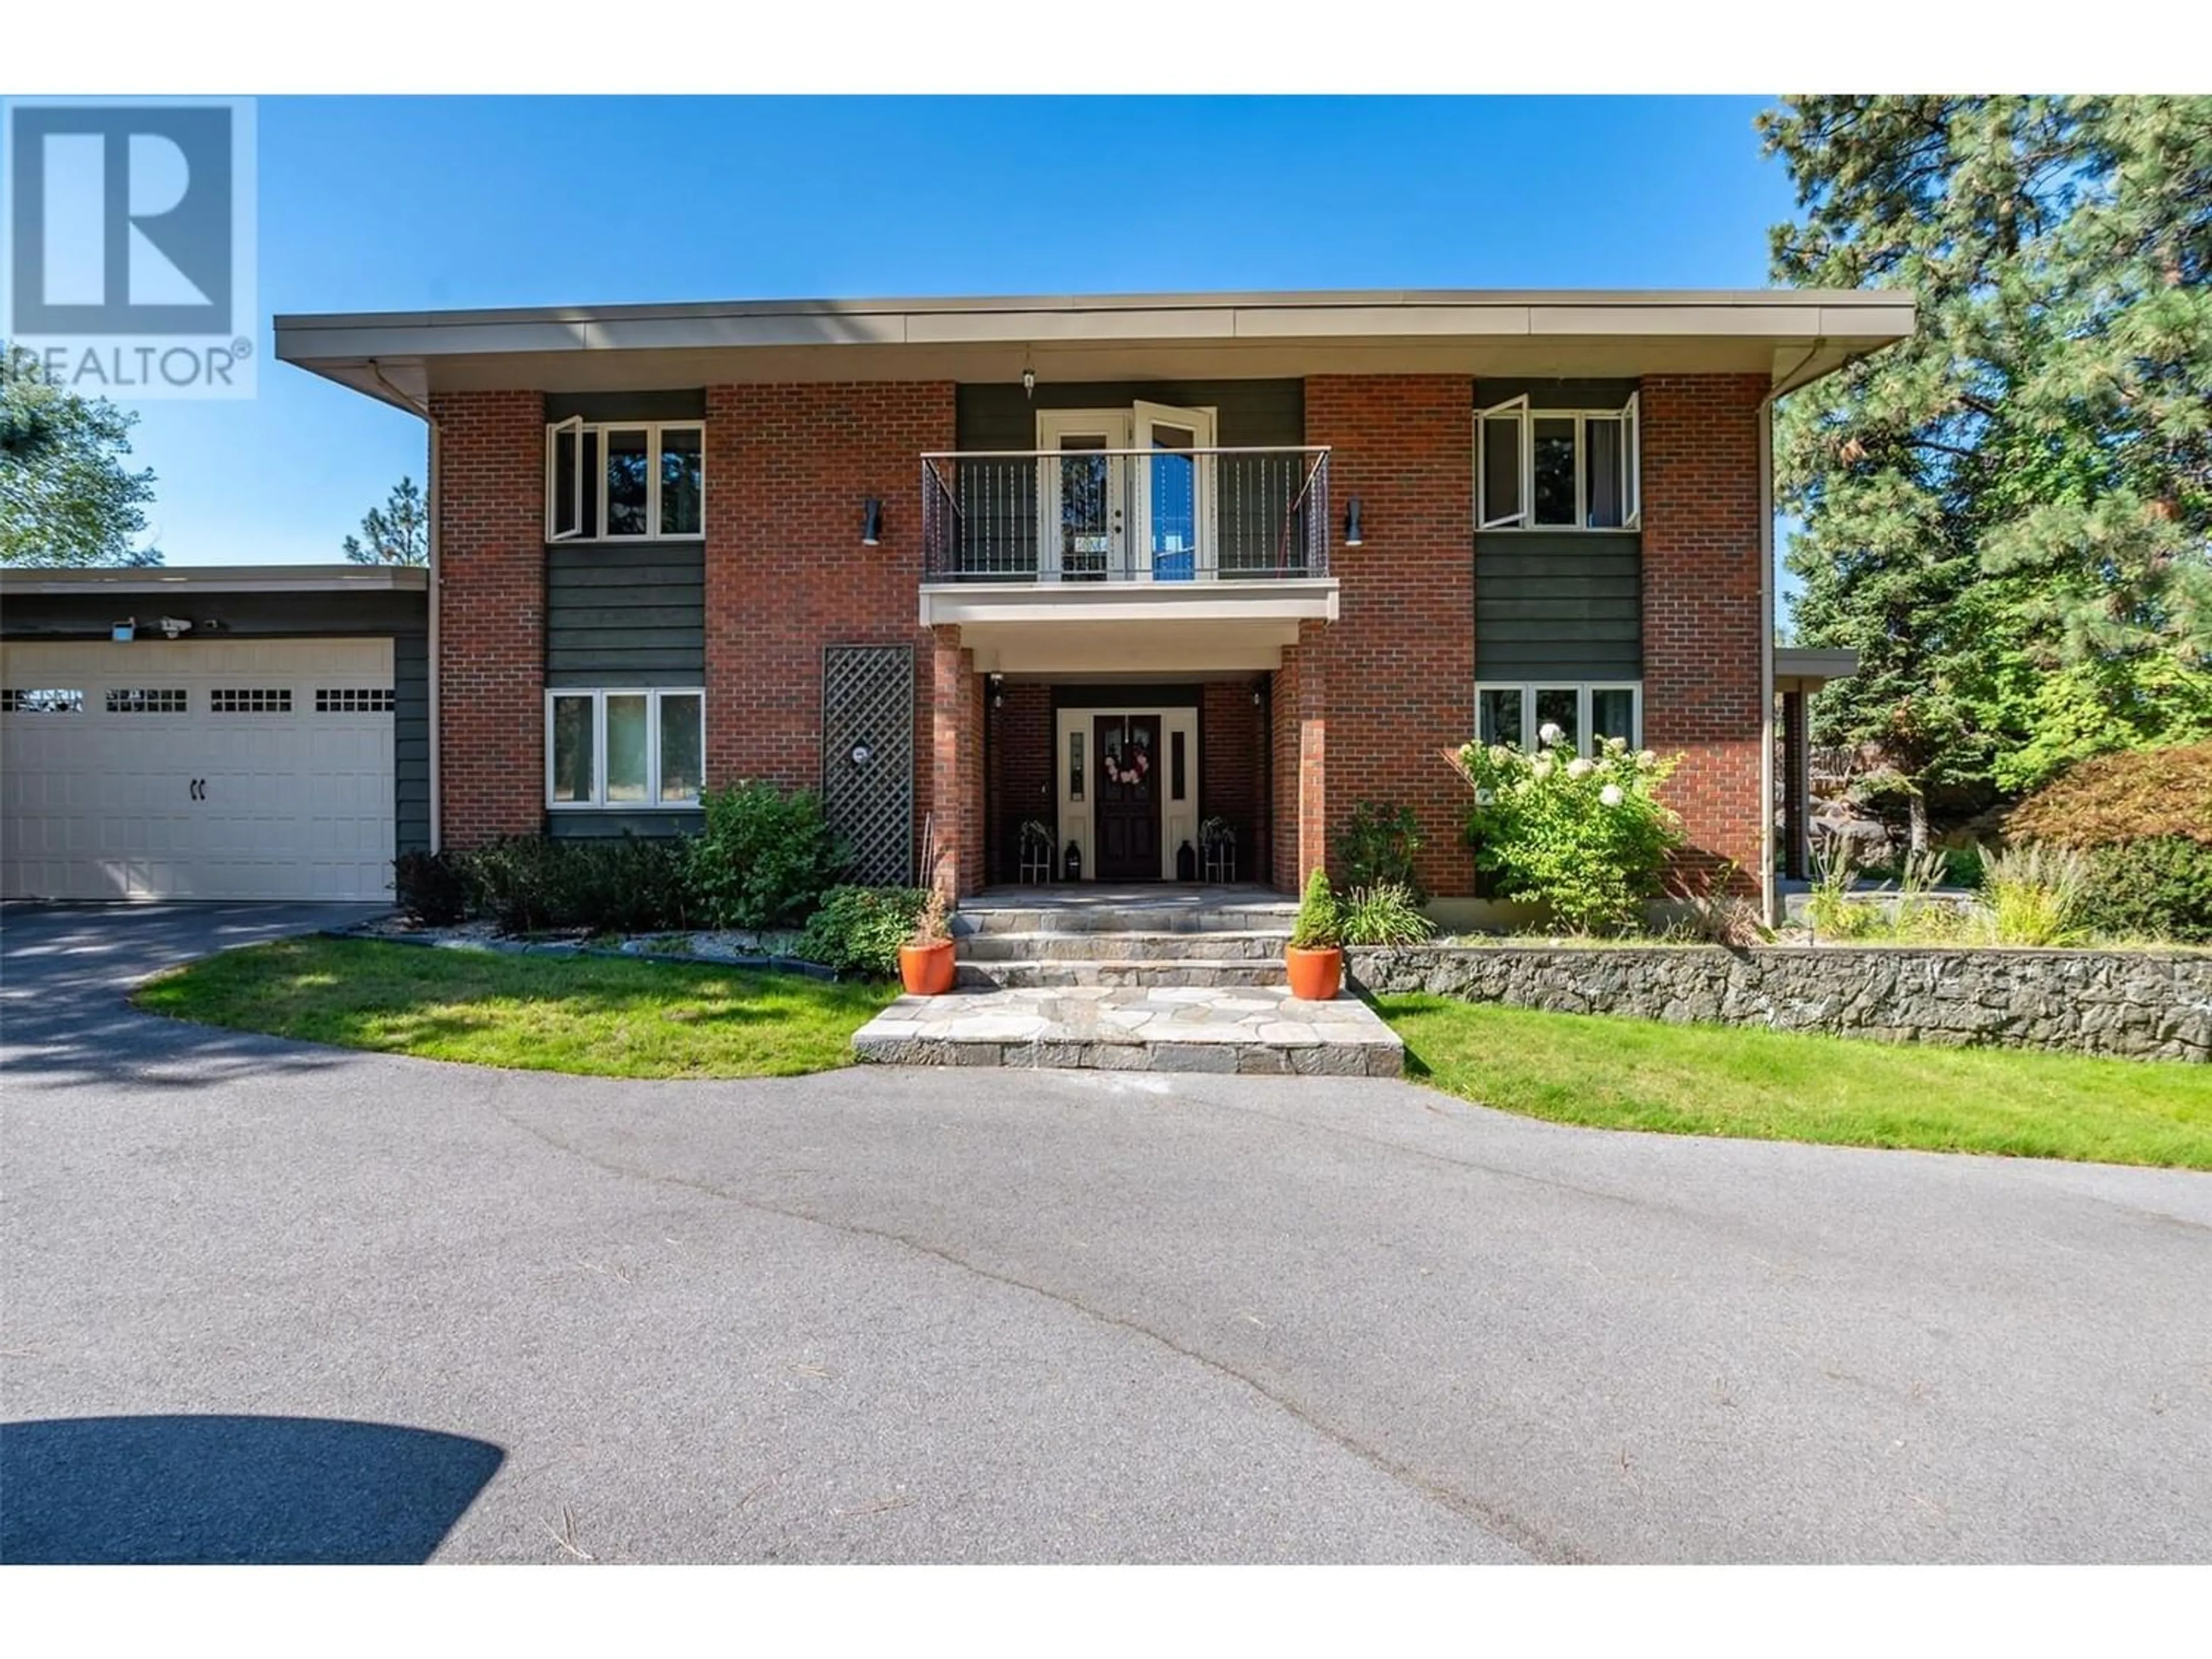 Home with brick exterior material for 4085 Valleyview Road, Penticton British Columbia V2A8V8